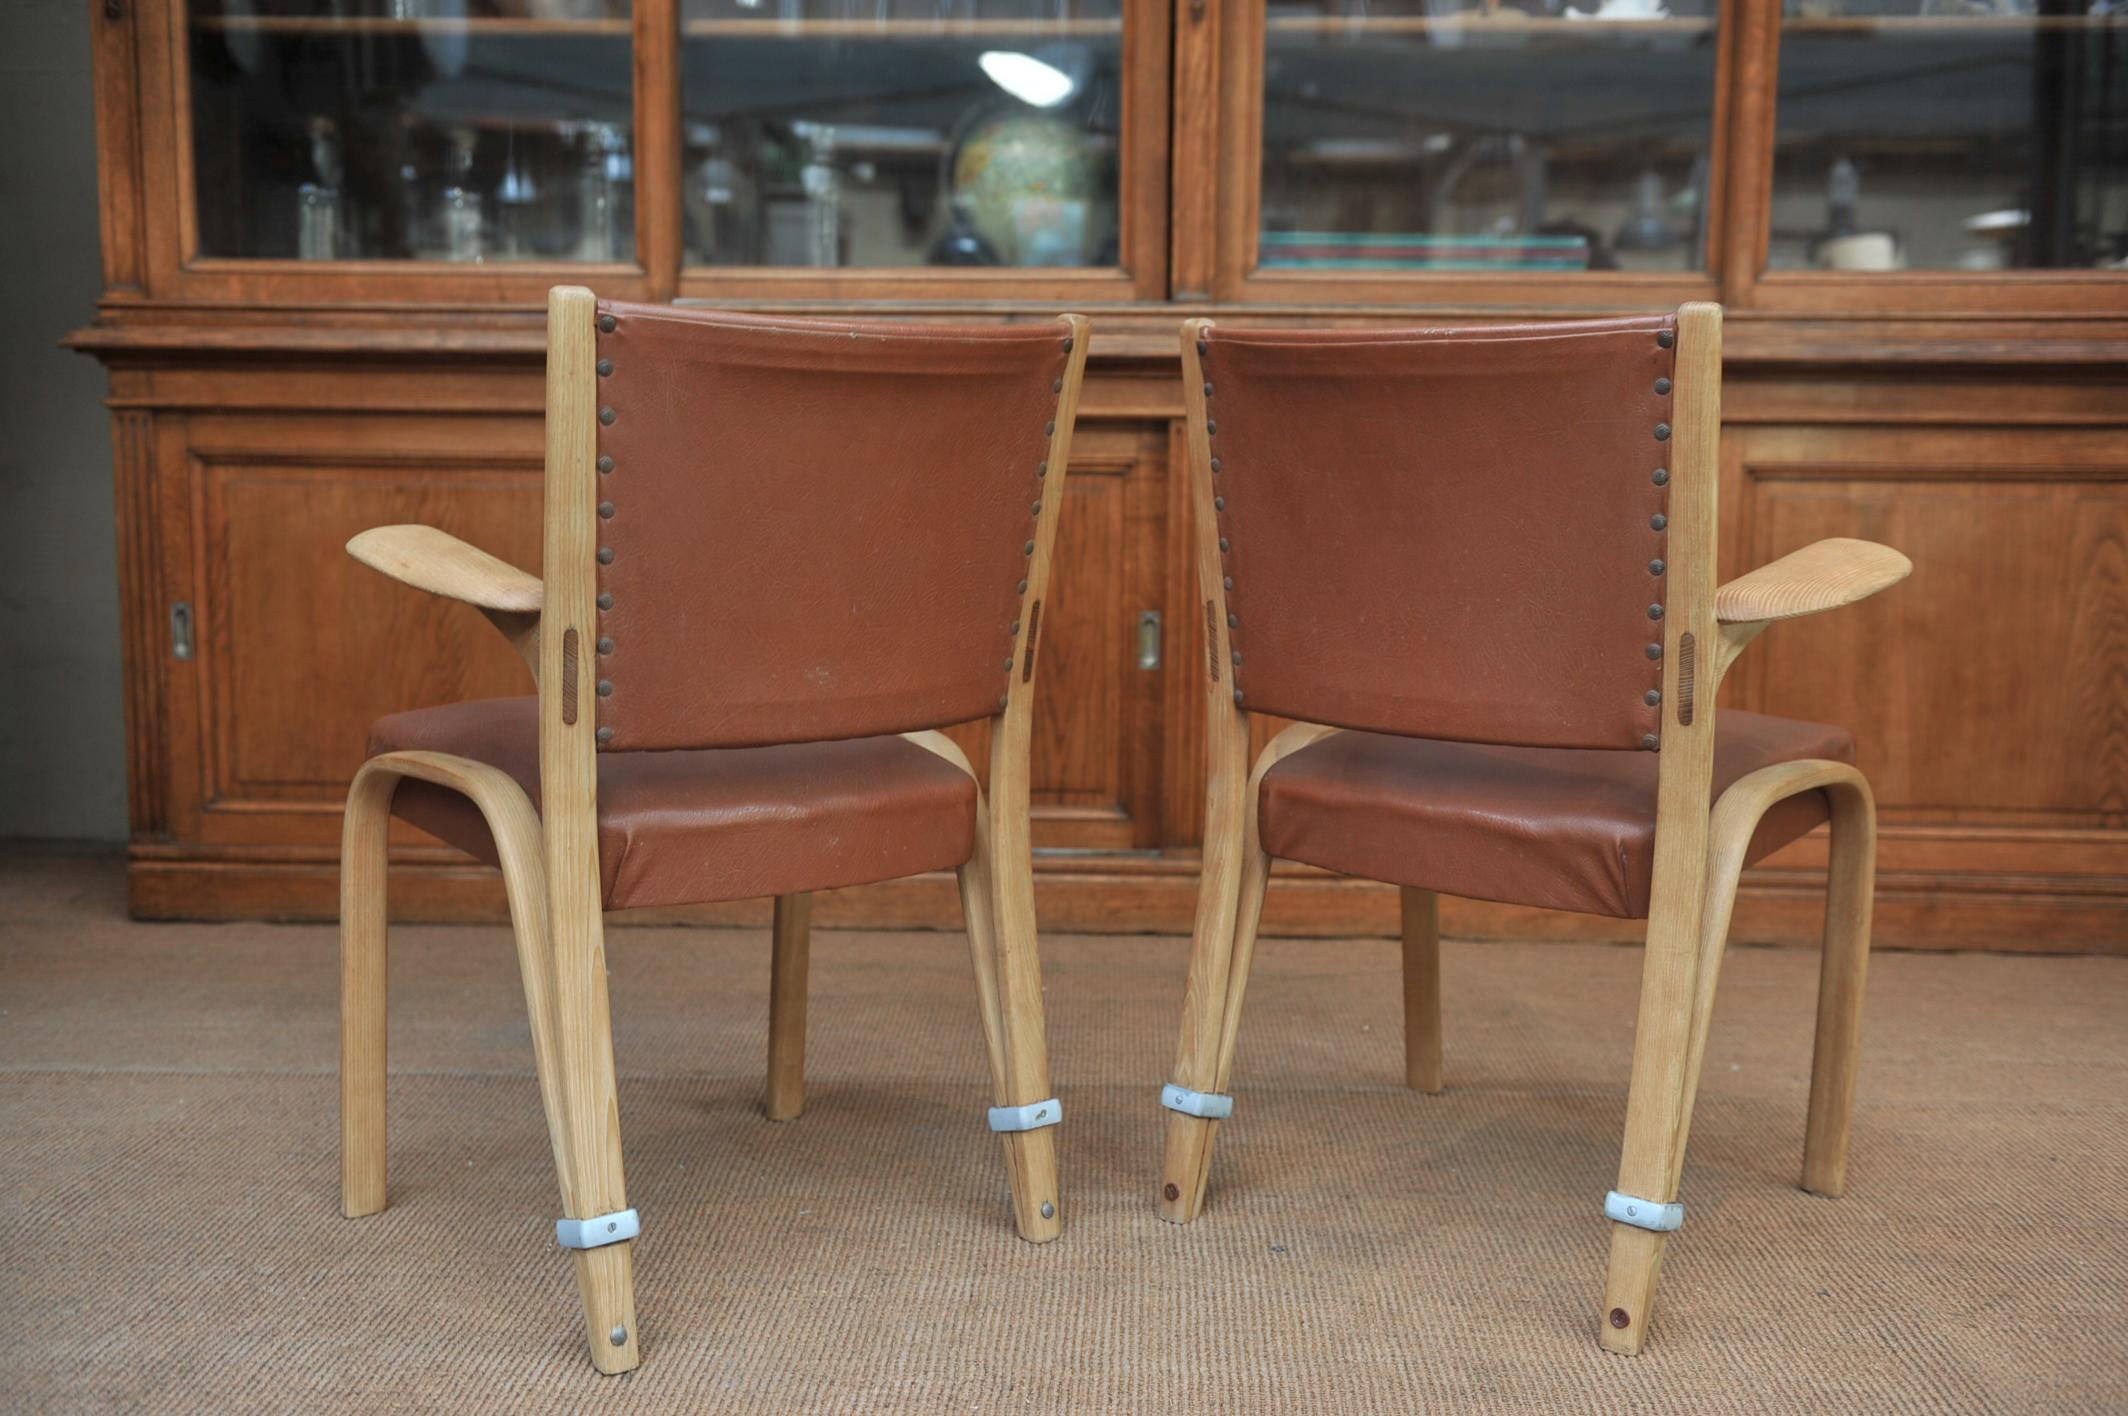 Set of Four Elm Wood Chairs by Bow Wood France, circa 1950 For Sale 1